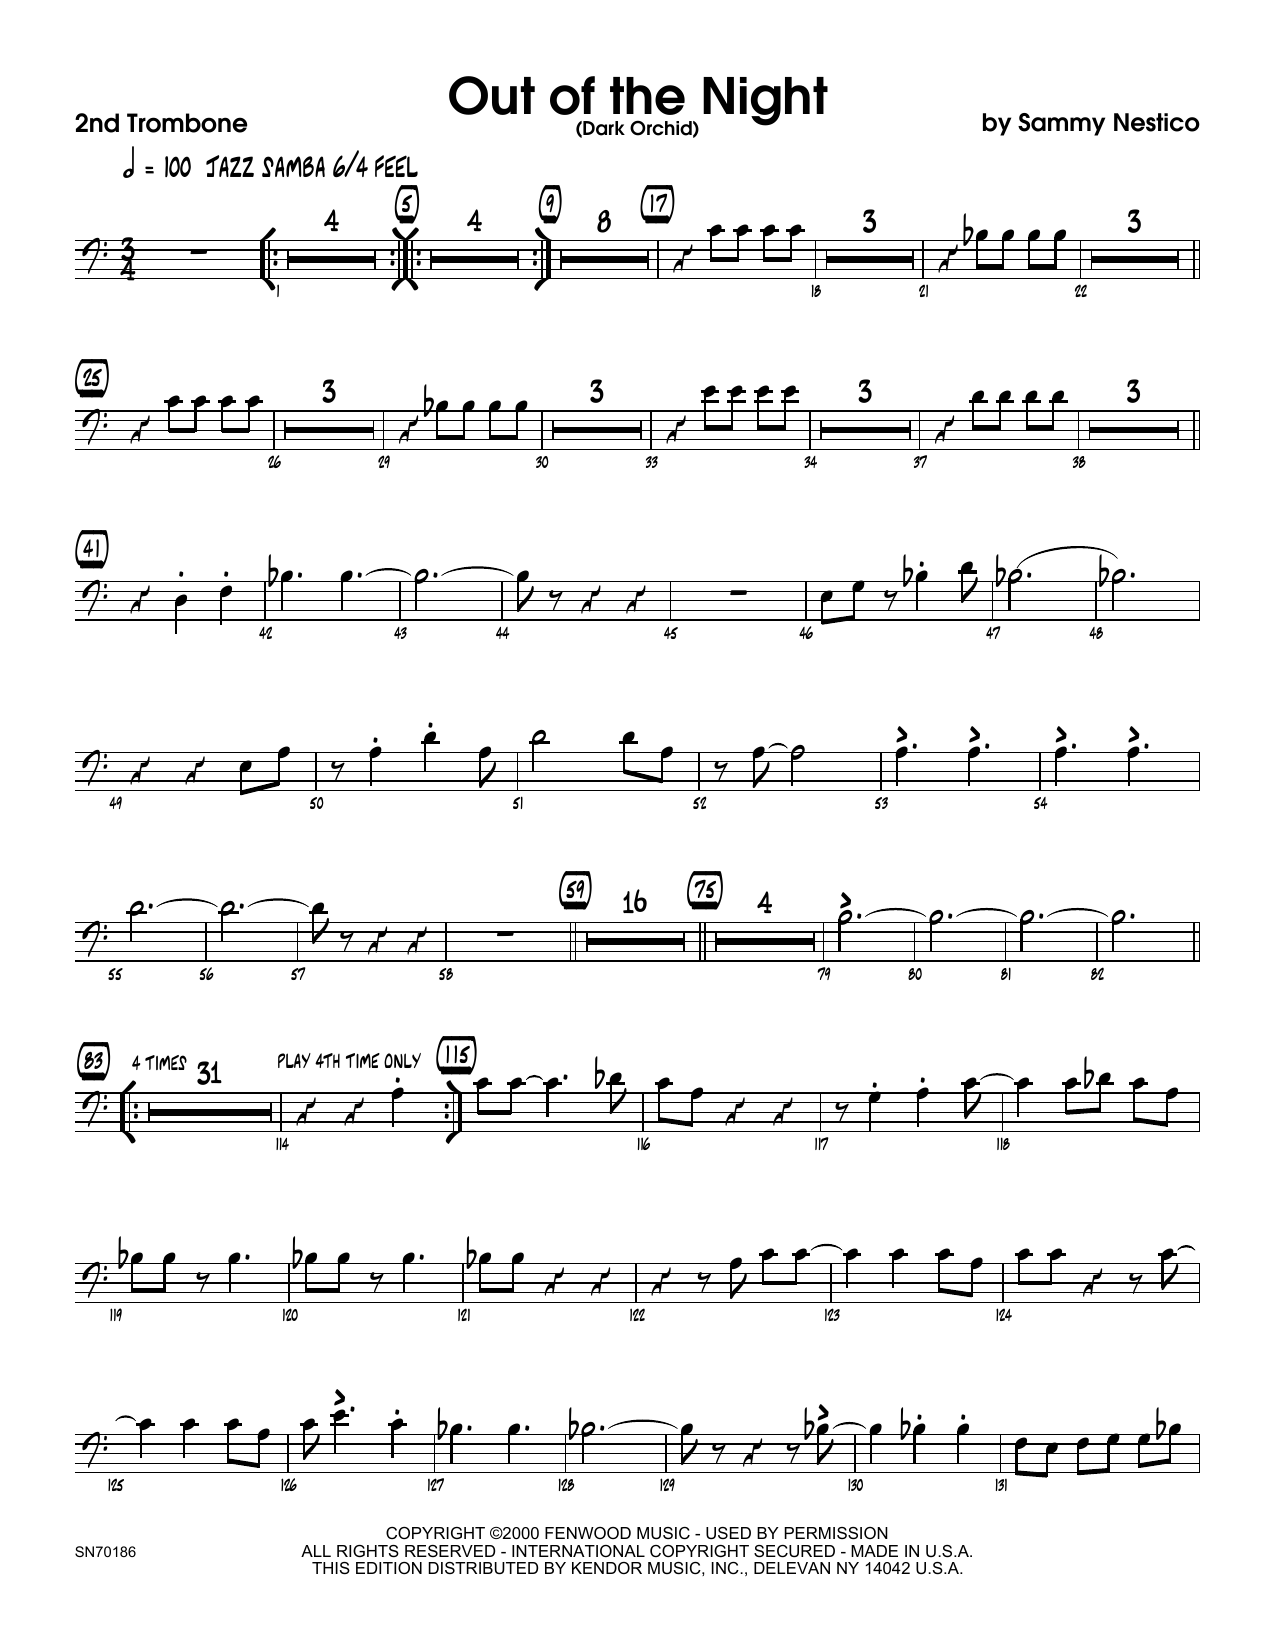 Download Sammy Nestico Out of the Night - 2nd Trombone Sheet Music